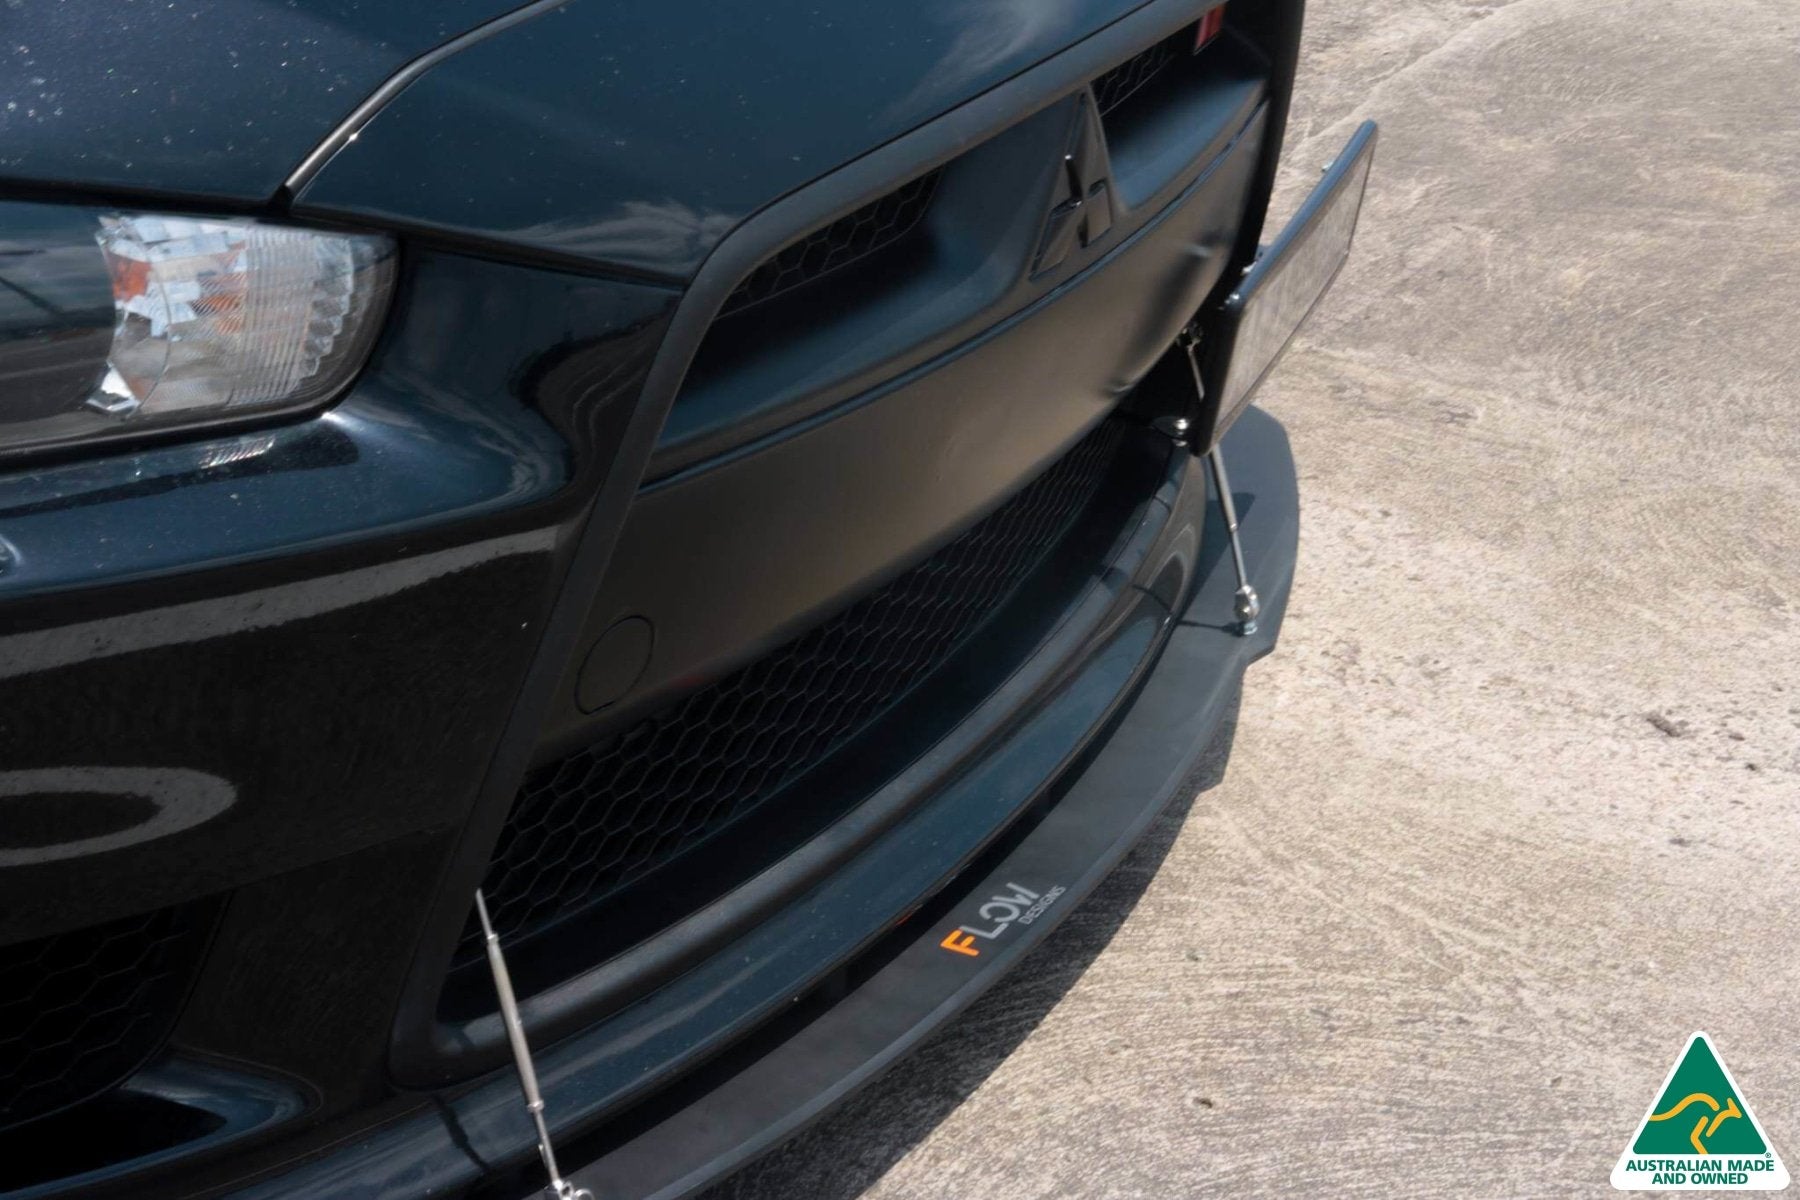 Lancer Ralliart CJ Front Splitter V2.5 With Support Rods - MODE Auto Concepts